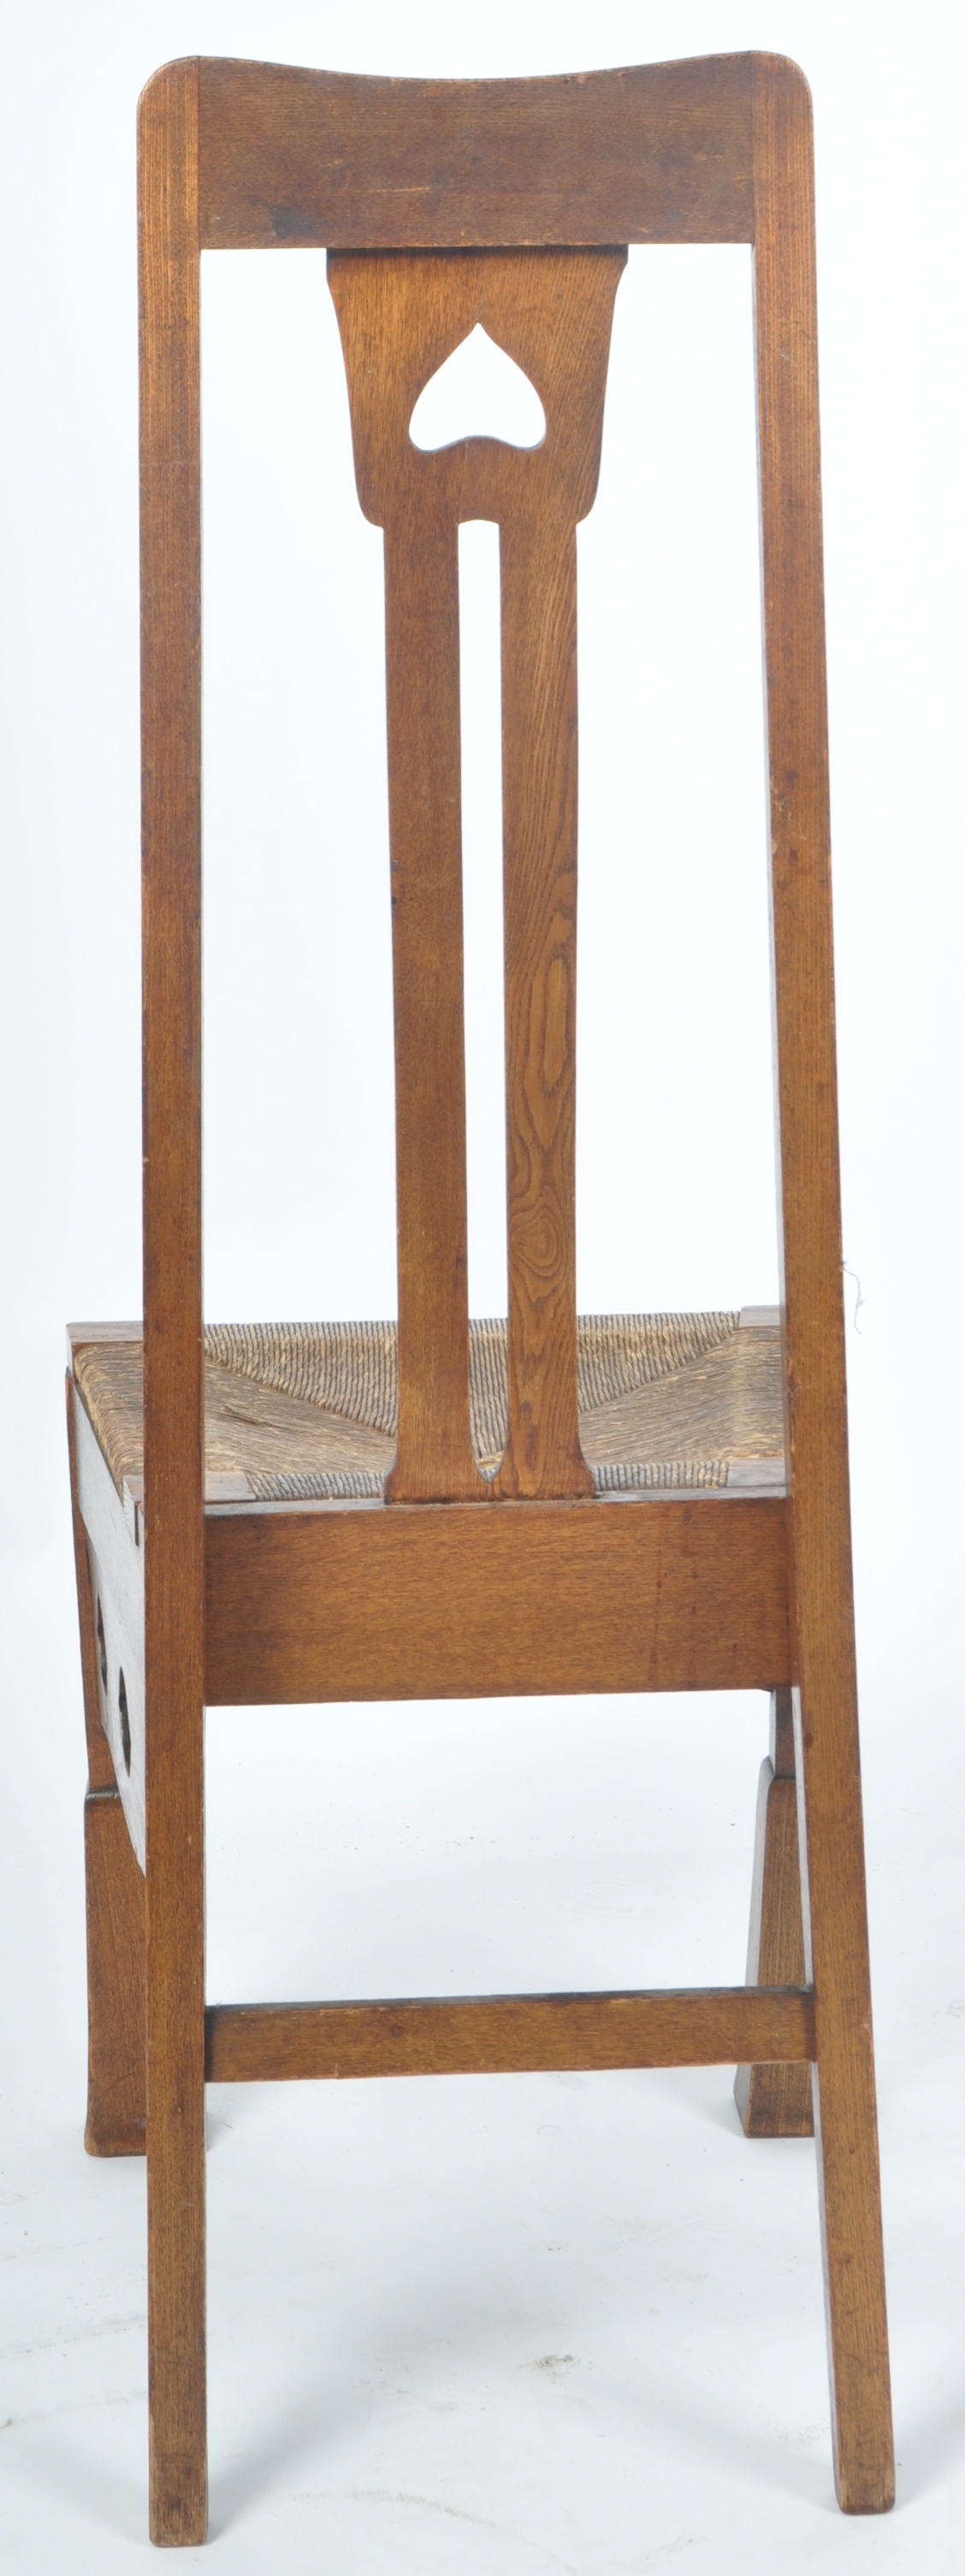 ATTRIBUTED TO VOYSEY - ARTS & CRAFTS SIDE CHAIR - Image 8 of 9